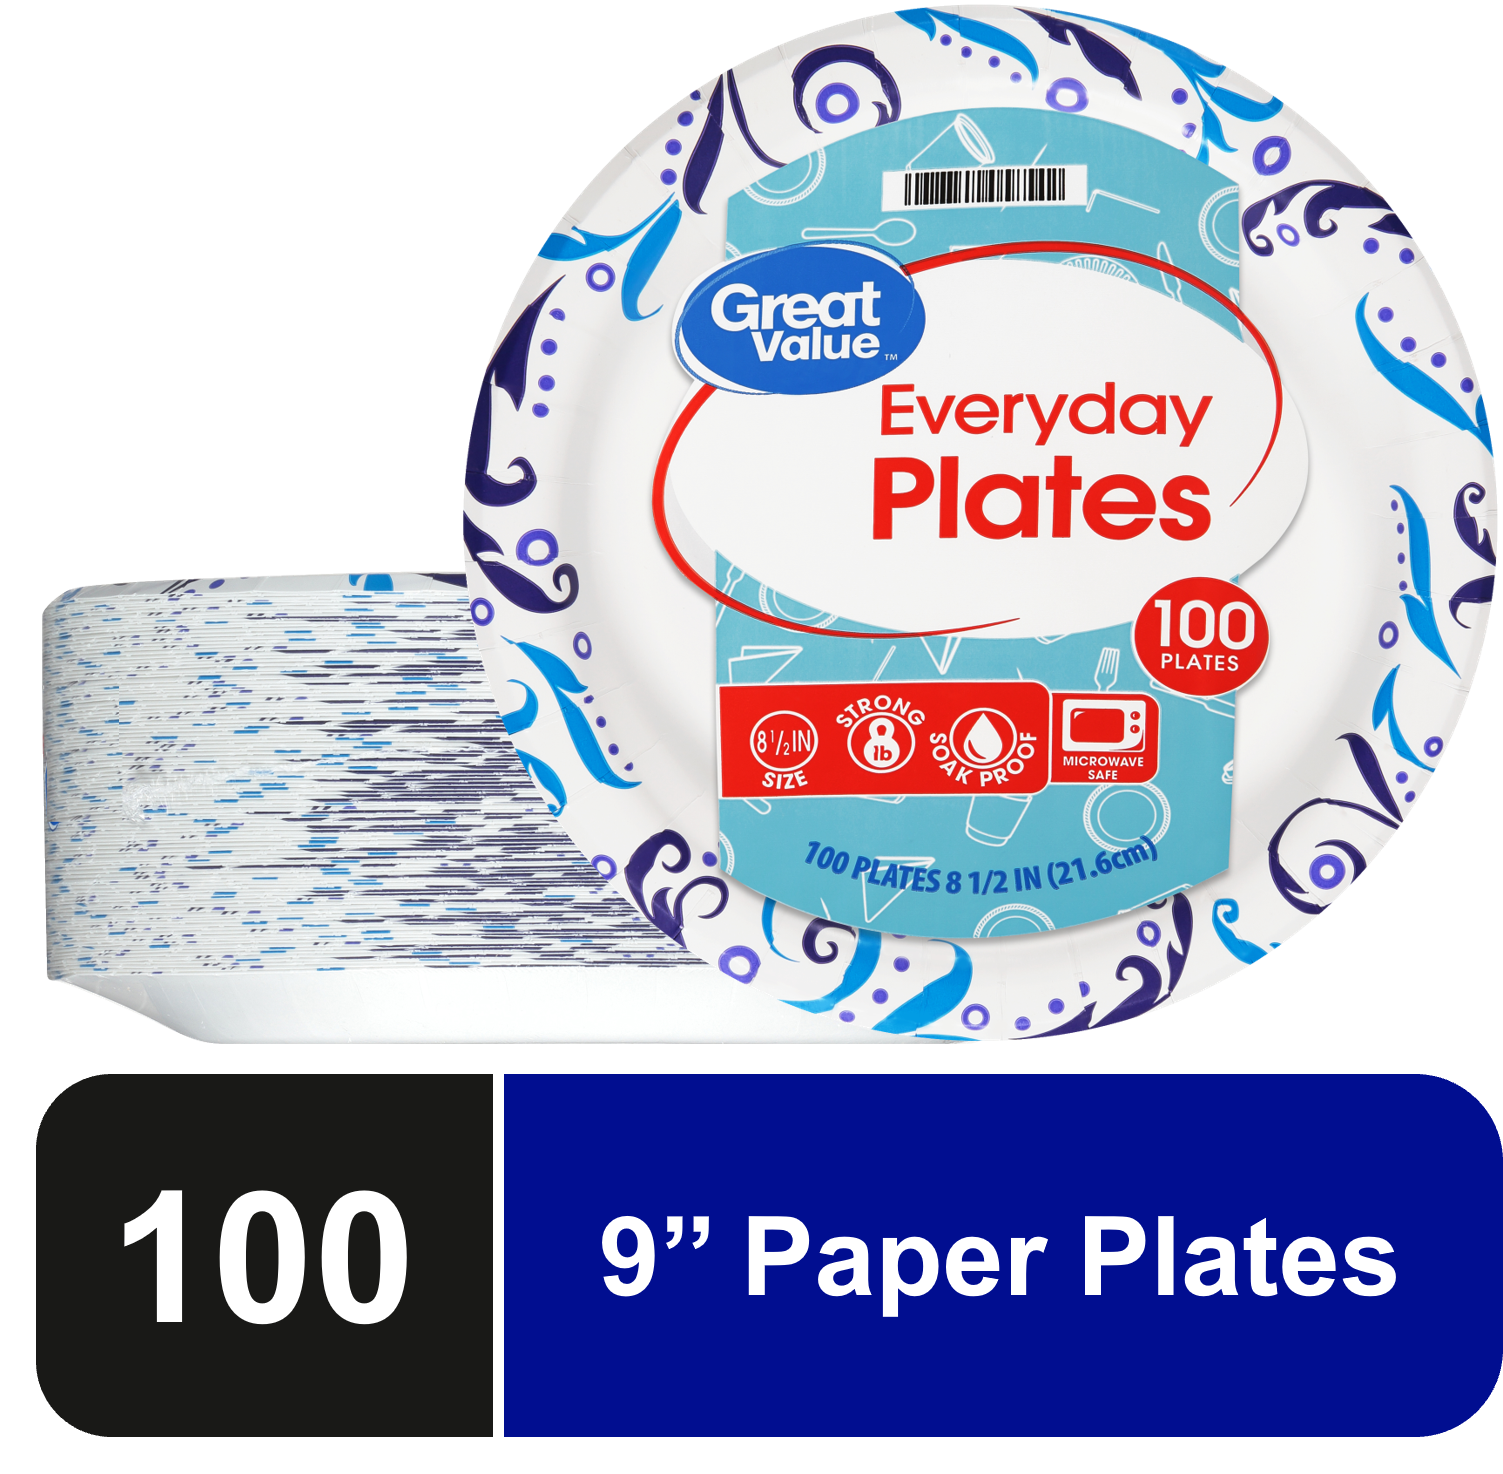 Great Value Everyday Strong, Soak Proof, Microwave Safe, Disposable Paper Lunch Plates, 9 in, 100 Plates, Patterned - image 1 of 9